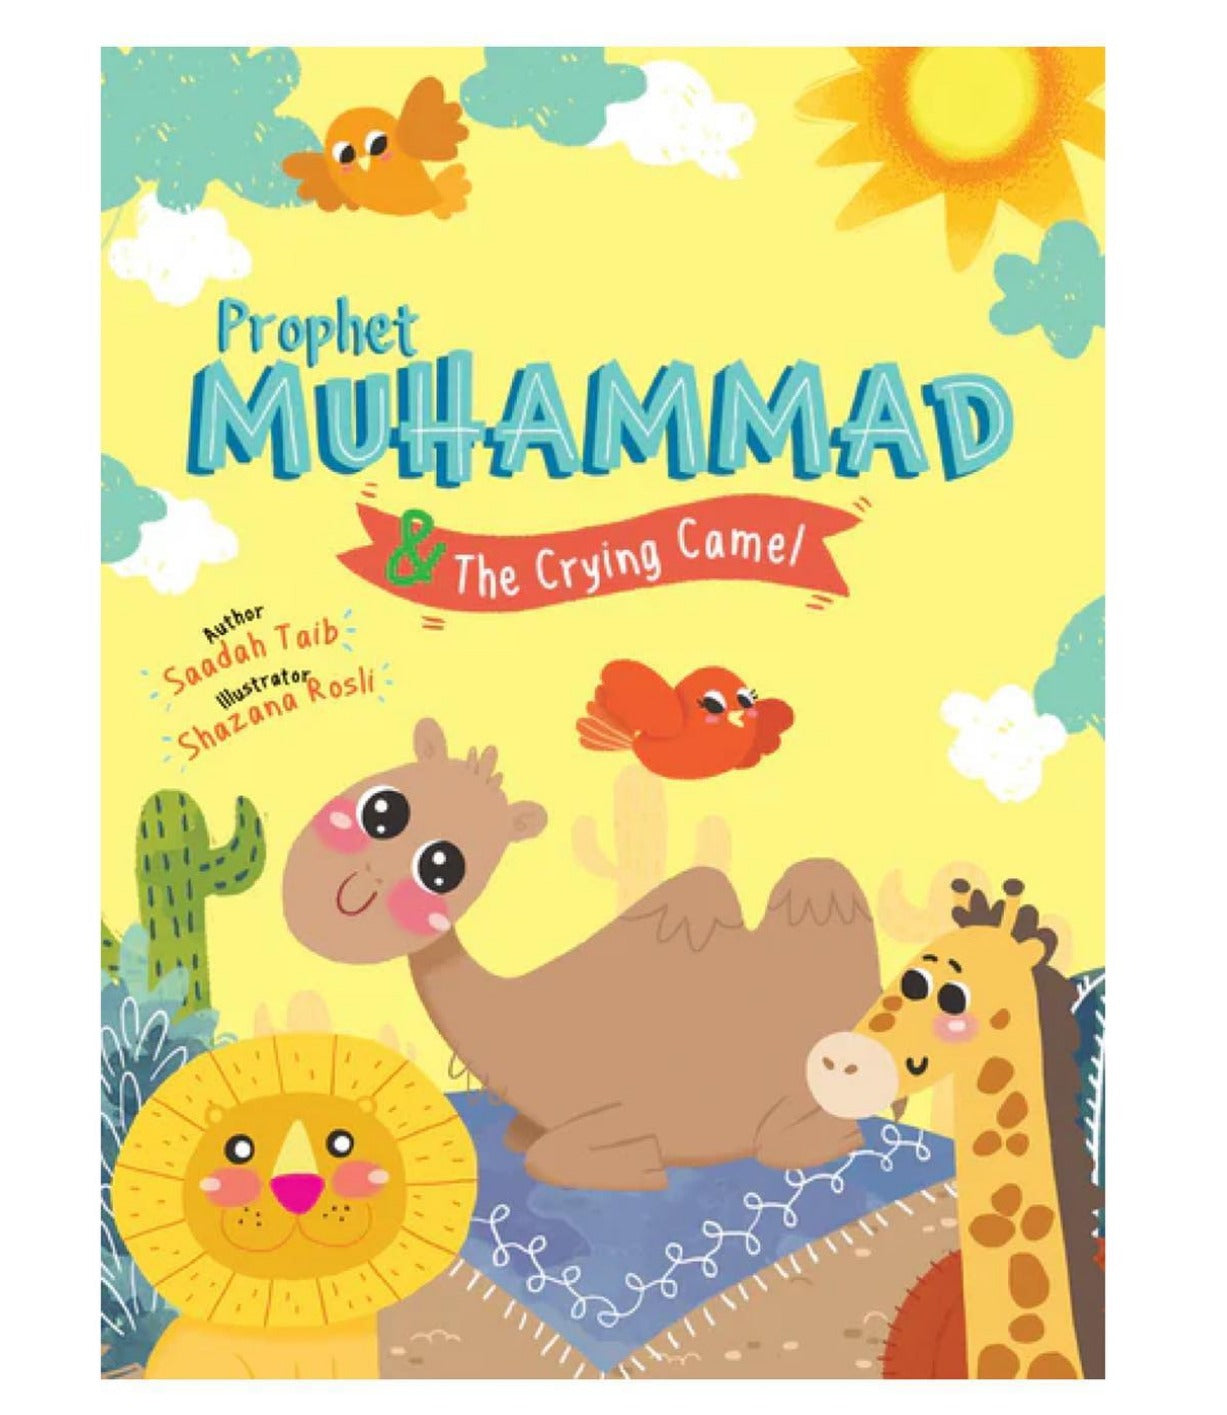 Prophet Muhammad & The Crying Camel